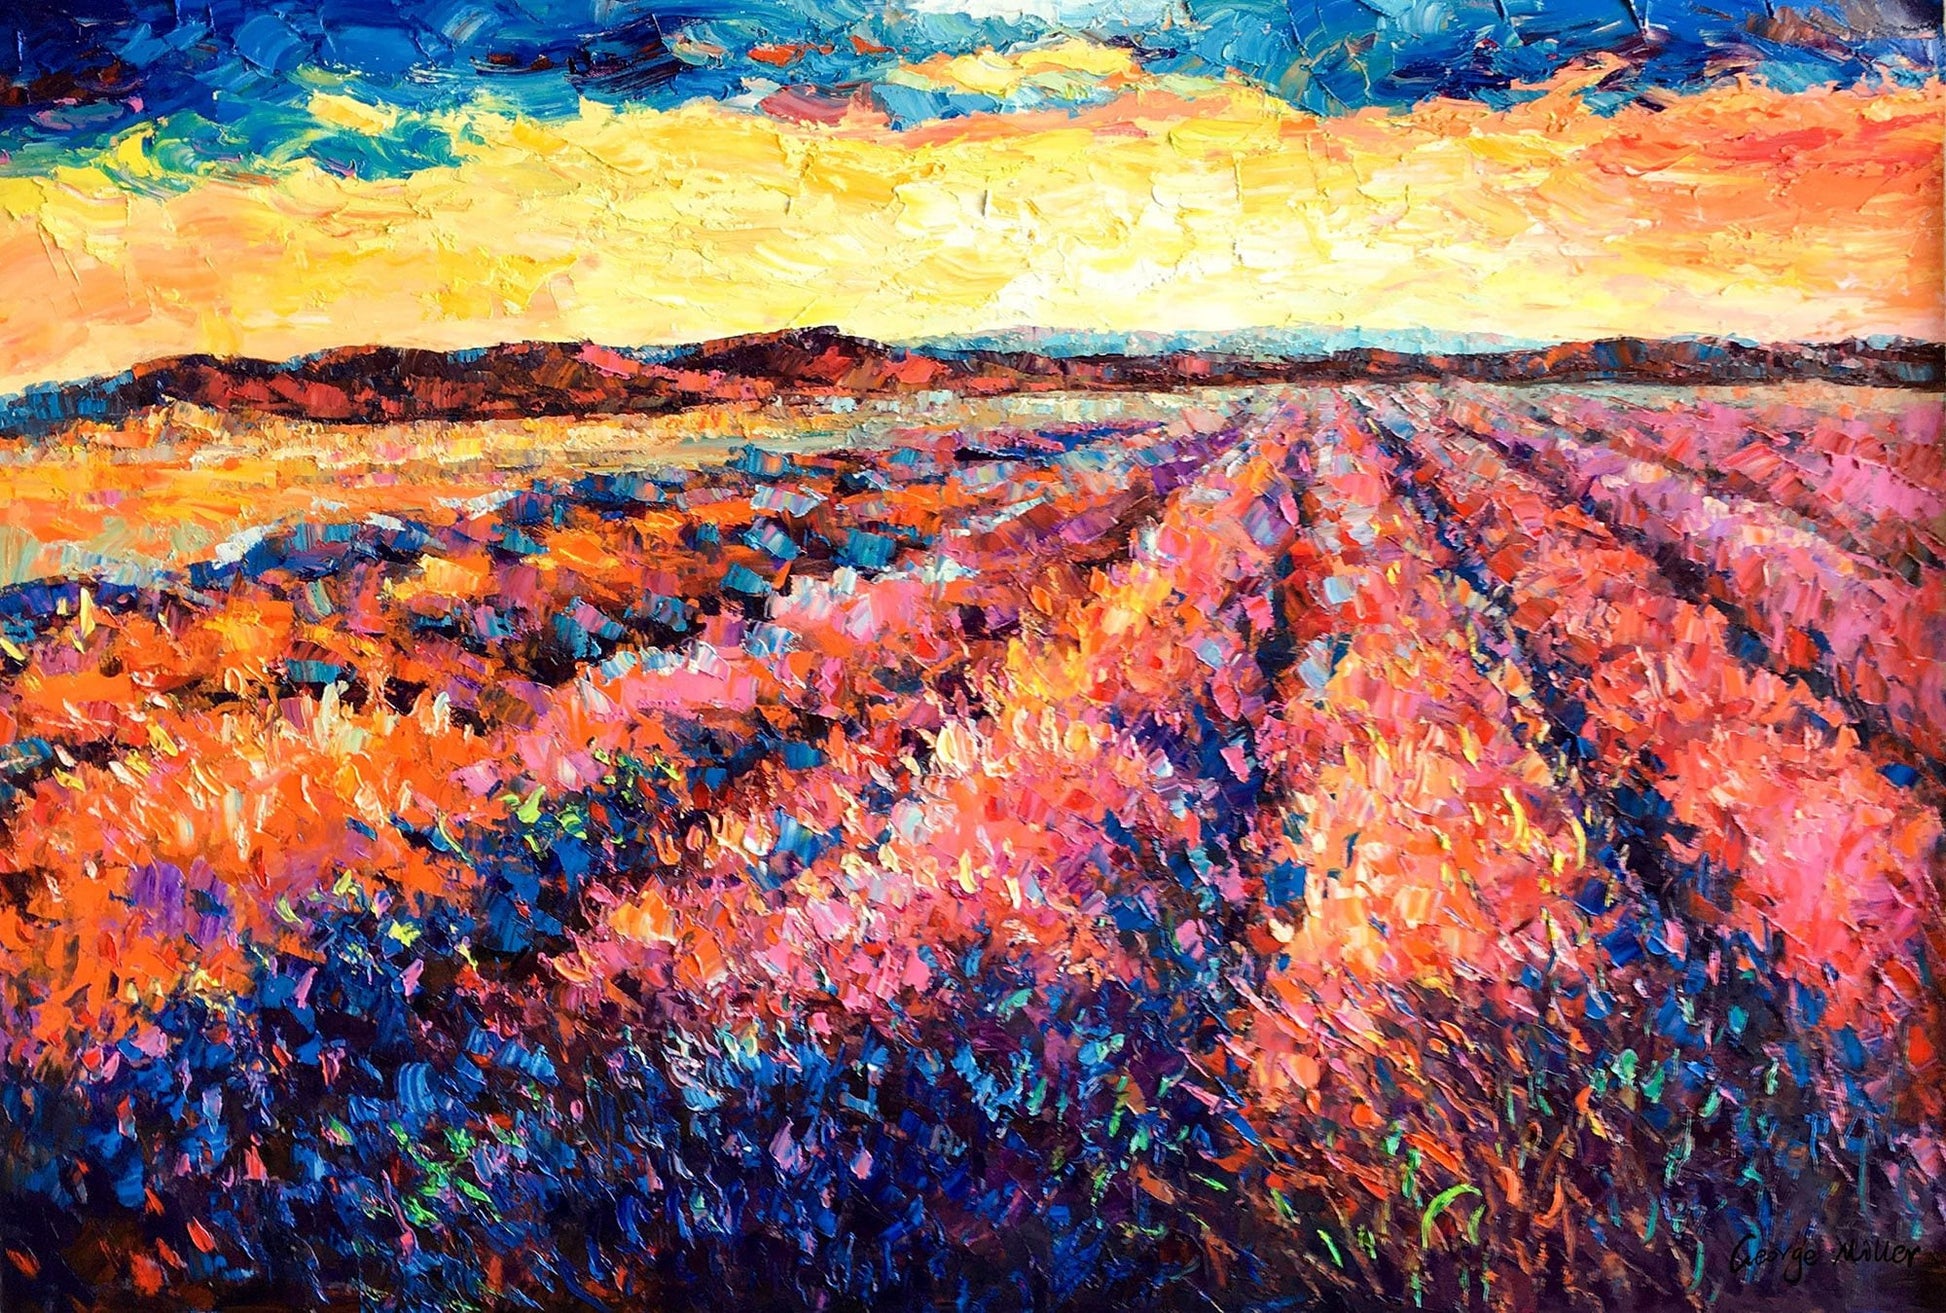 Large Landscape Oil Painting Tuscany Lavender Fields Spring Sunrise, Oil Painting Original, Canvas Art, Abstract Painting, Abstract Wall Art